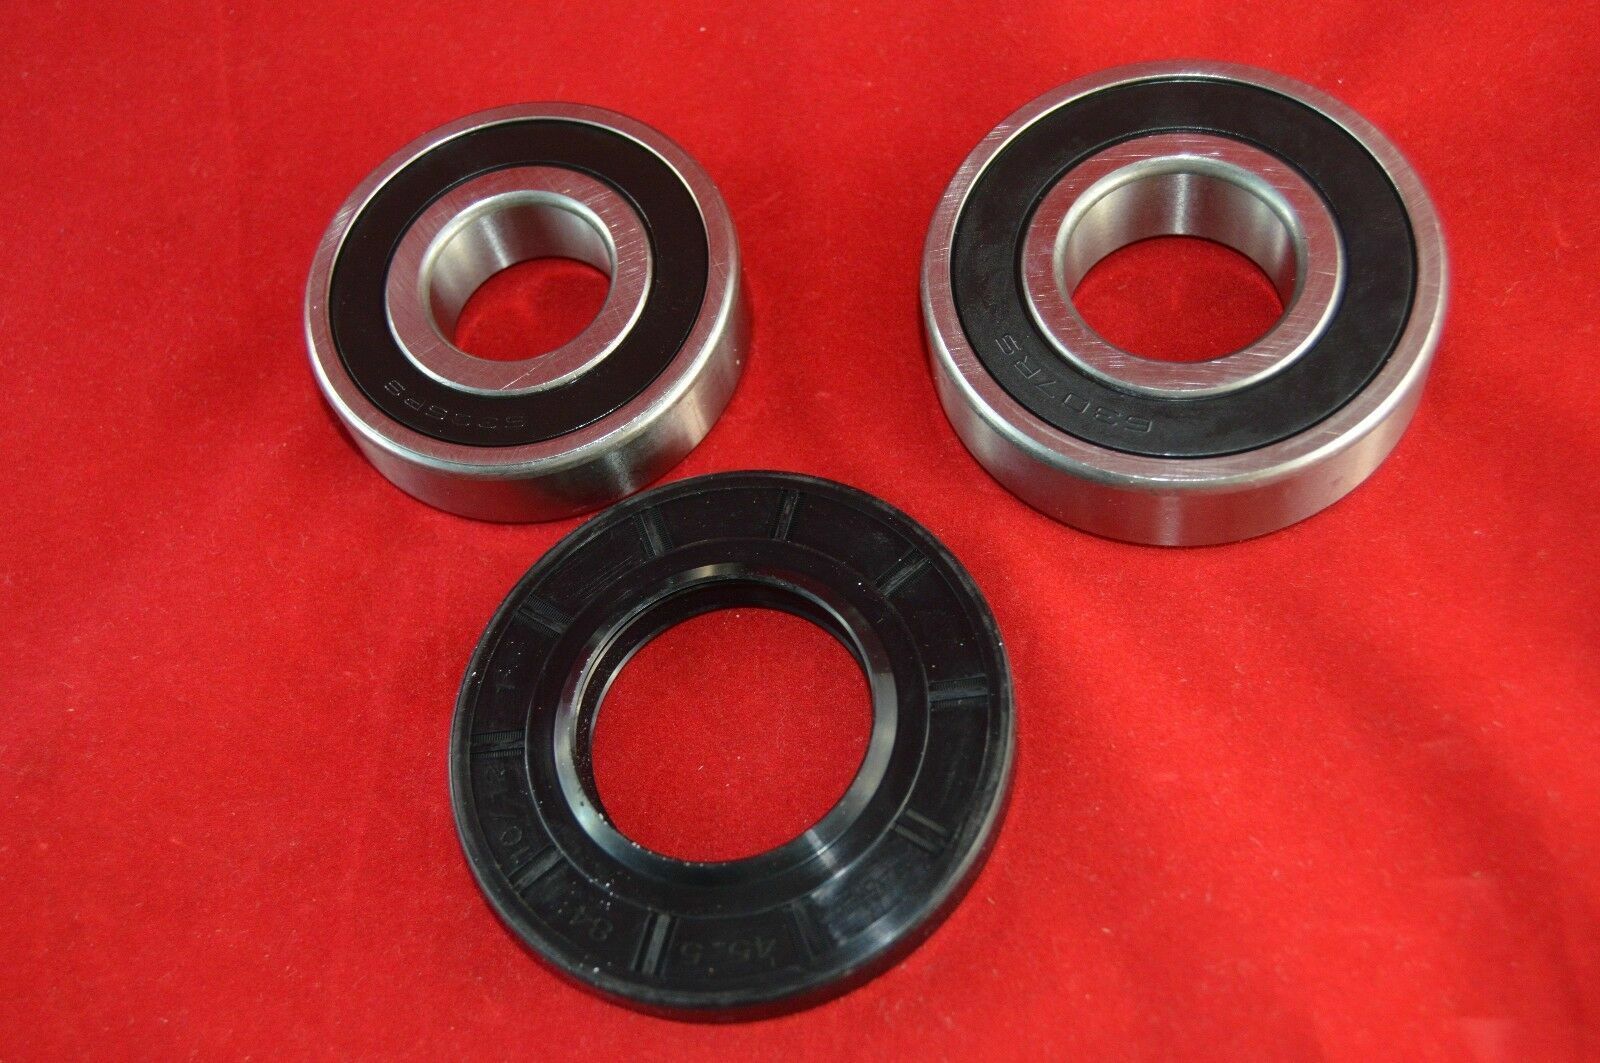 SCAROO  DC97-16151A Front Load Washer Tub Bearing Kit for Samsung, AP4579810,PS4221447,